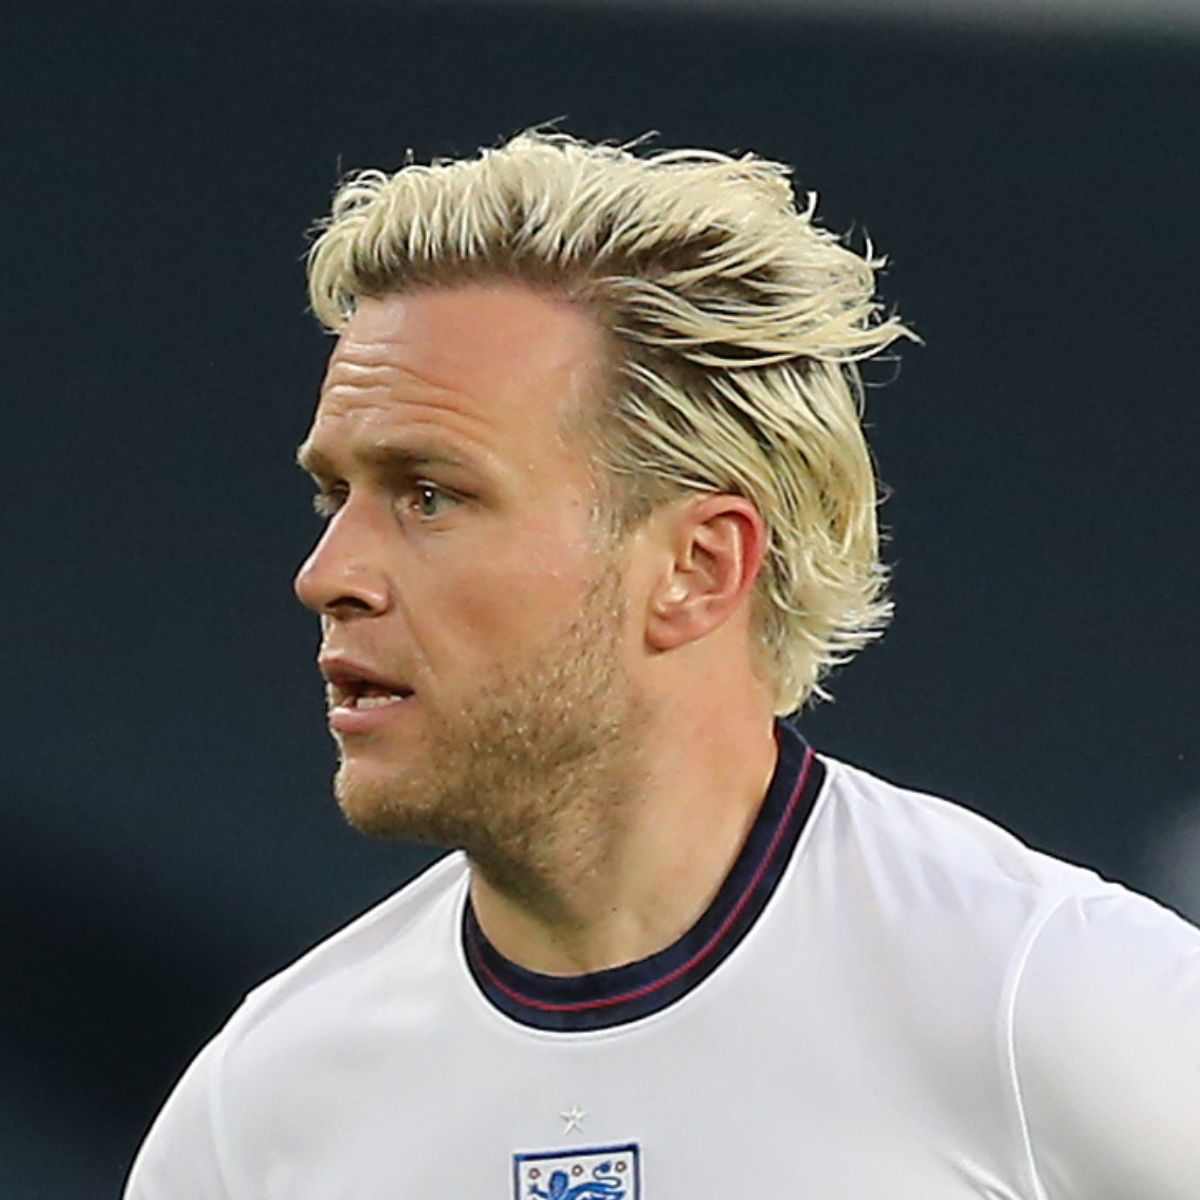 olly-murs-platinum-blonde-slicked-back-hairstyle-hairstyle-haircut-man-for-himself-ft.jpg